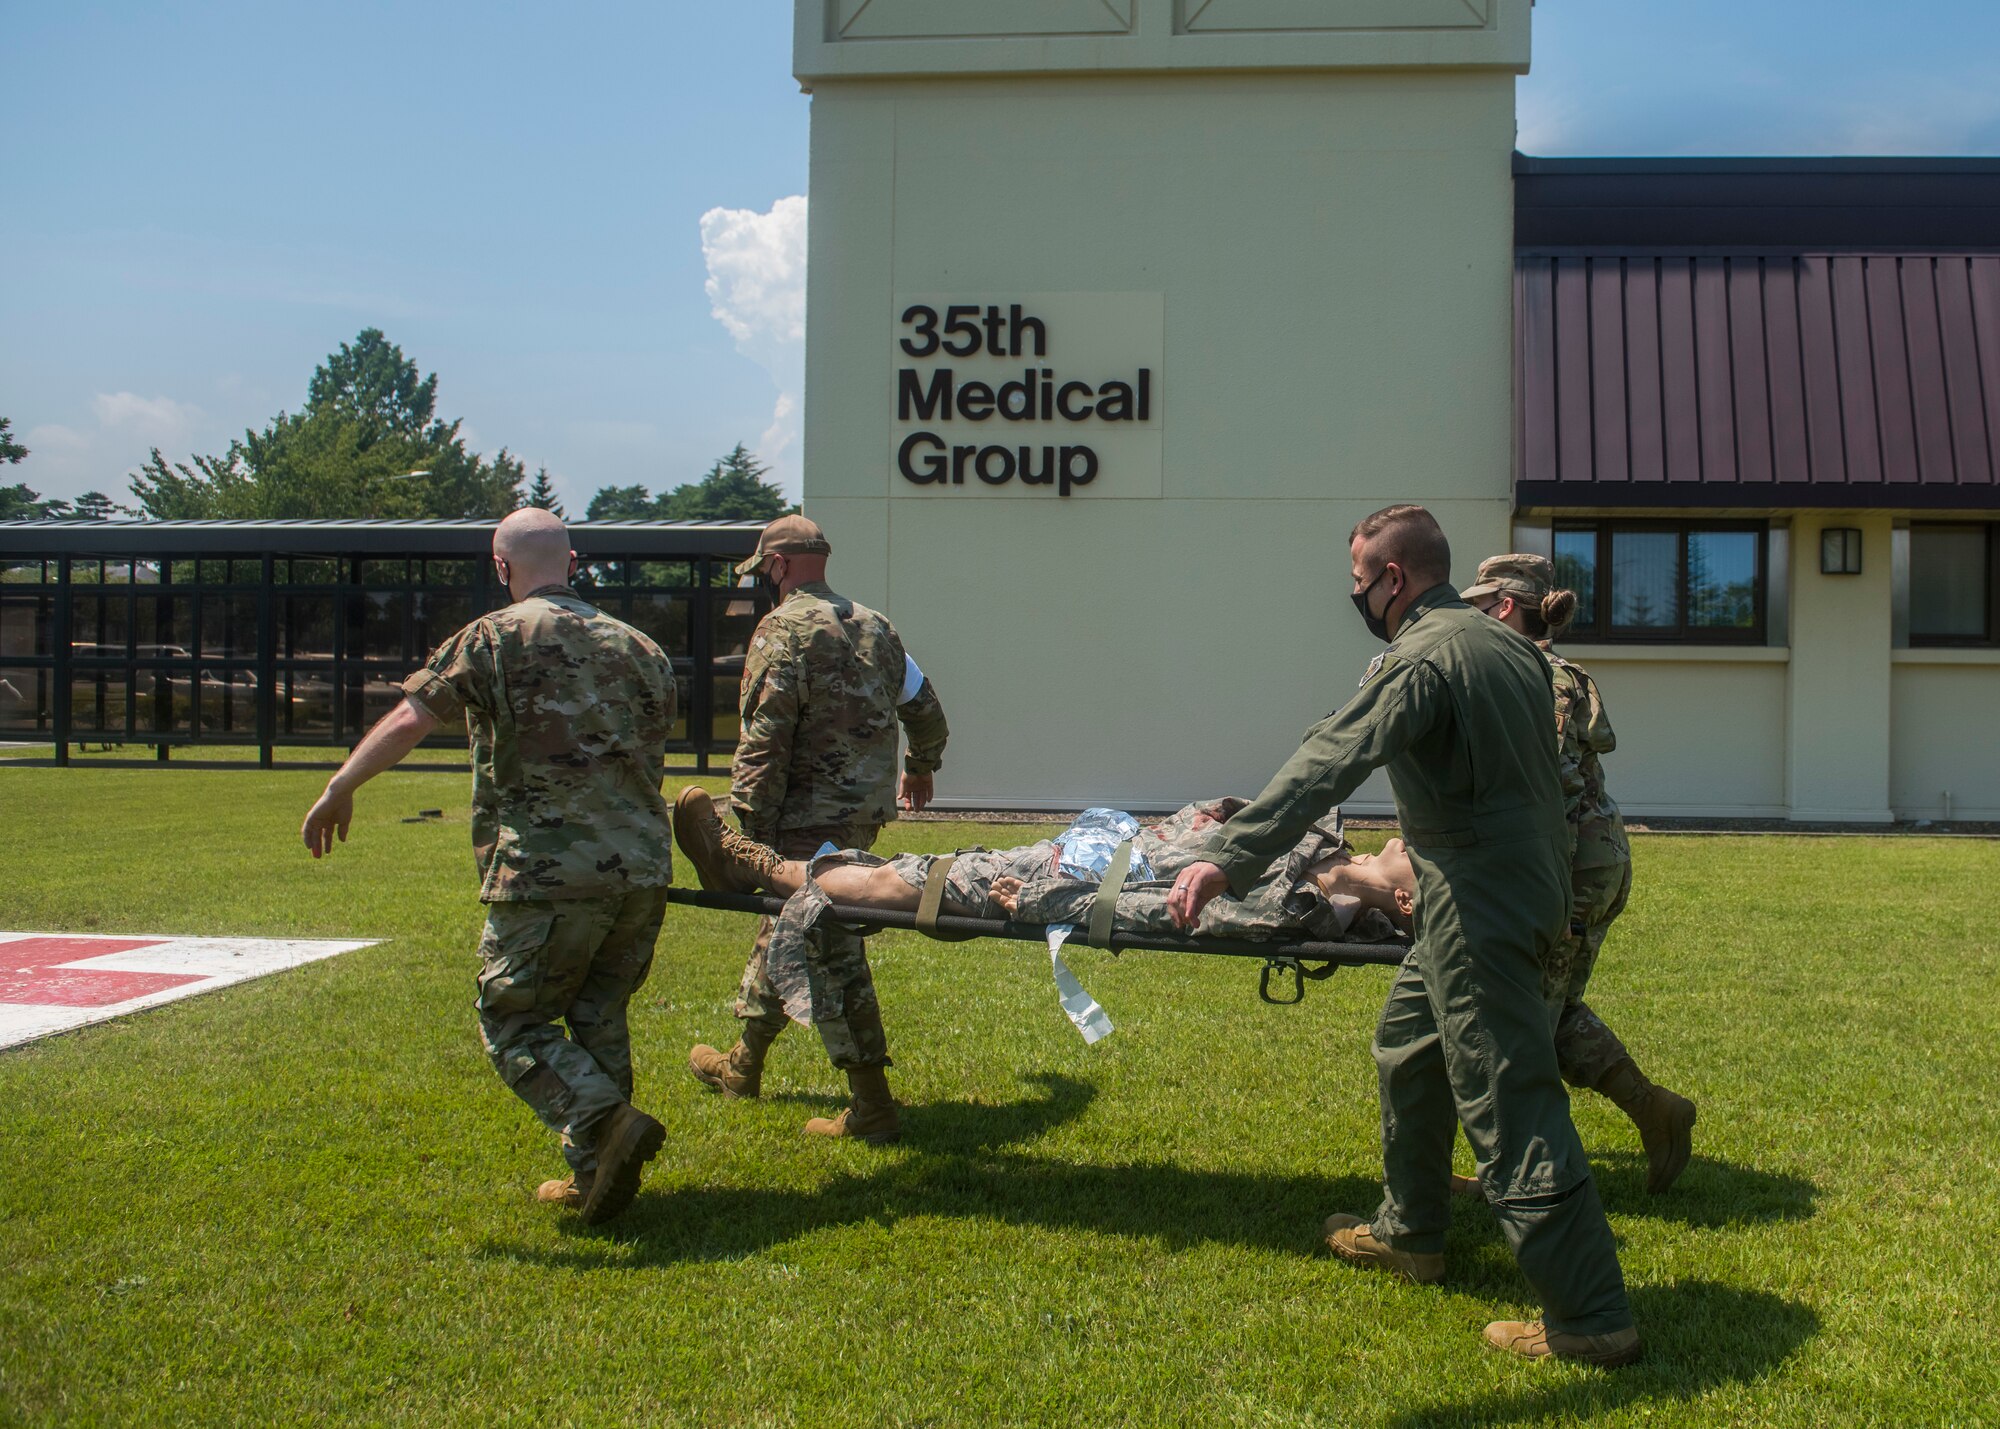 Four servicemembers in uniform, carry a simulated patient on a stretcher.